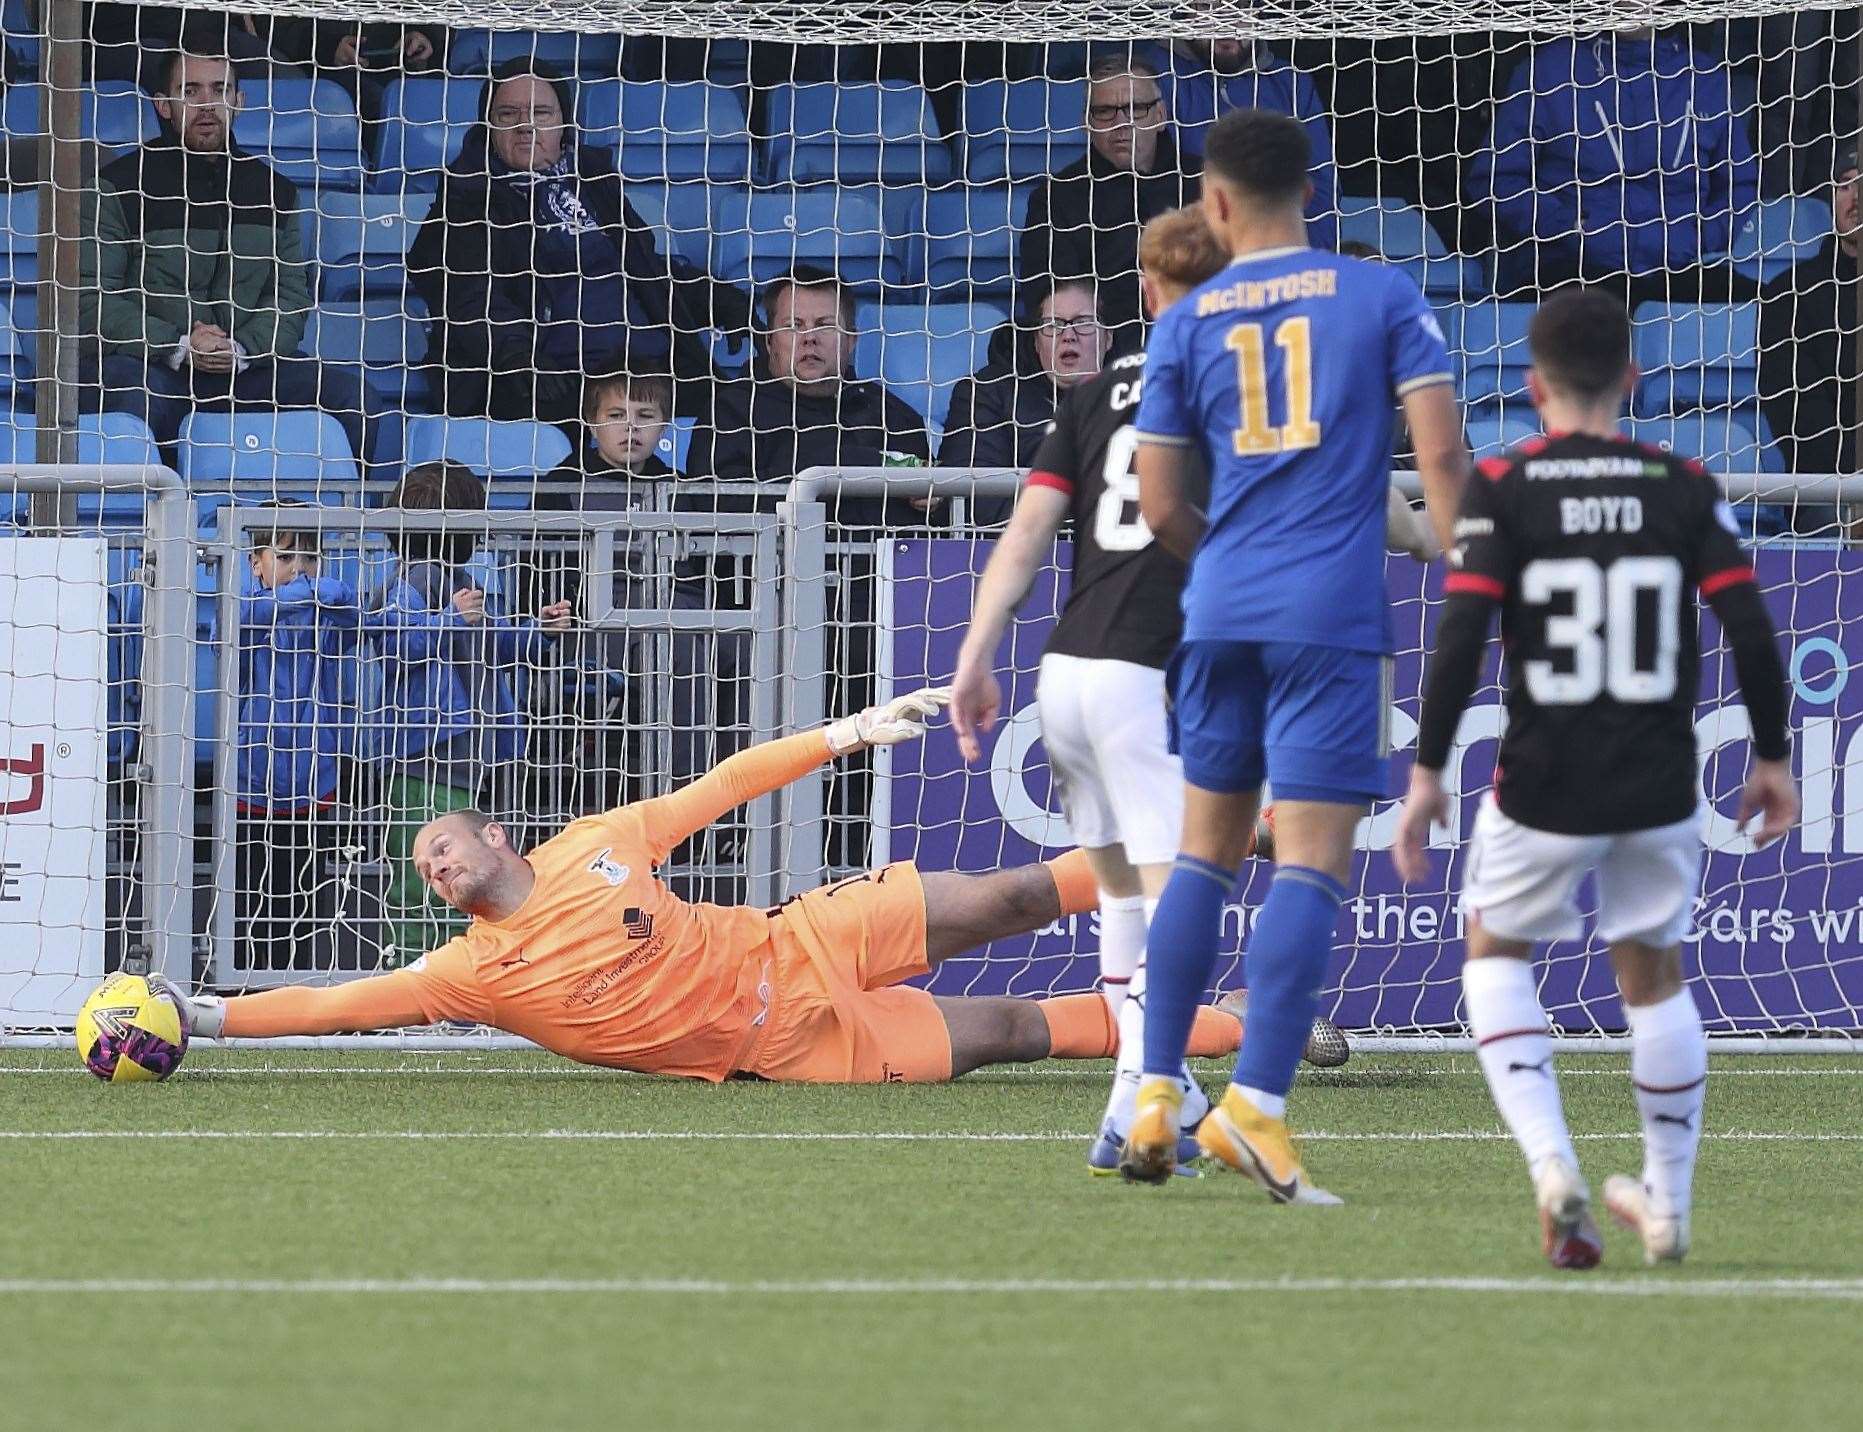 Ridgers makes a super save from Cove’s Leighton McIntosh.